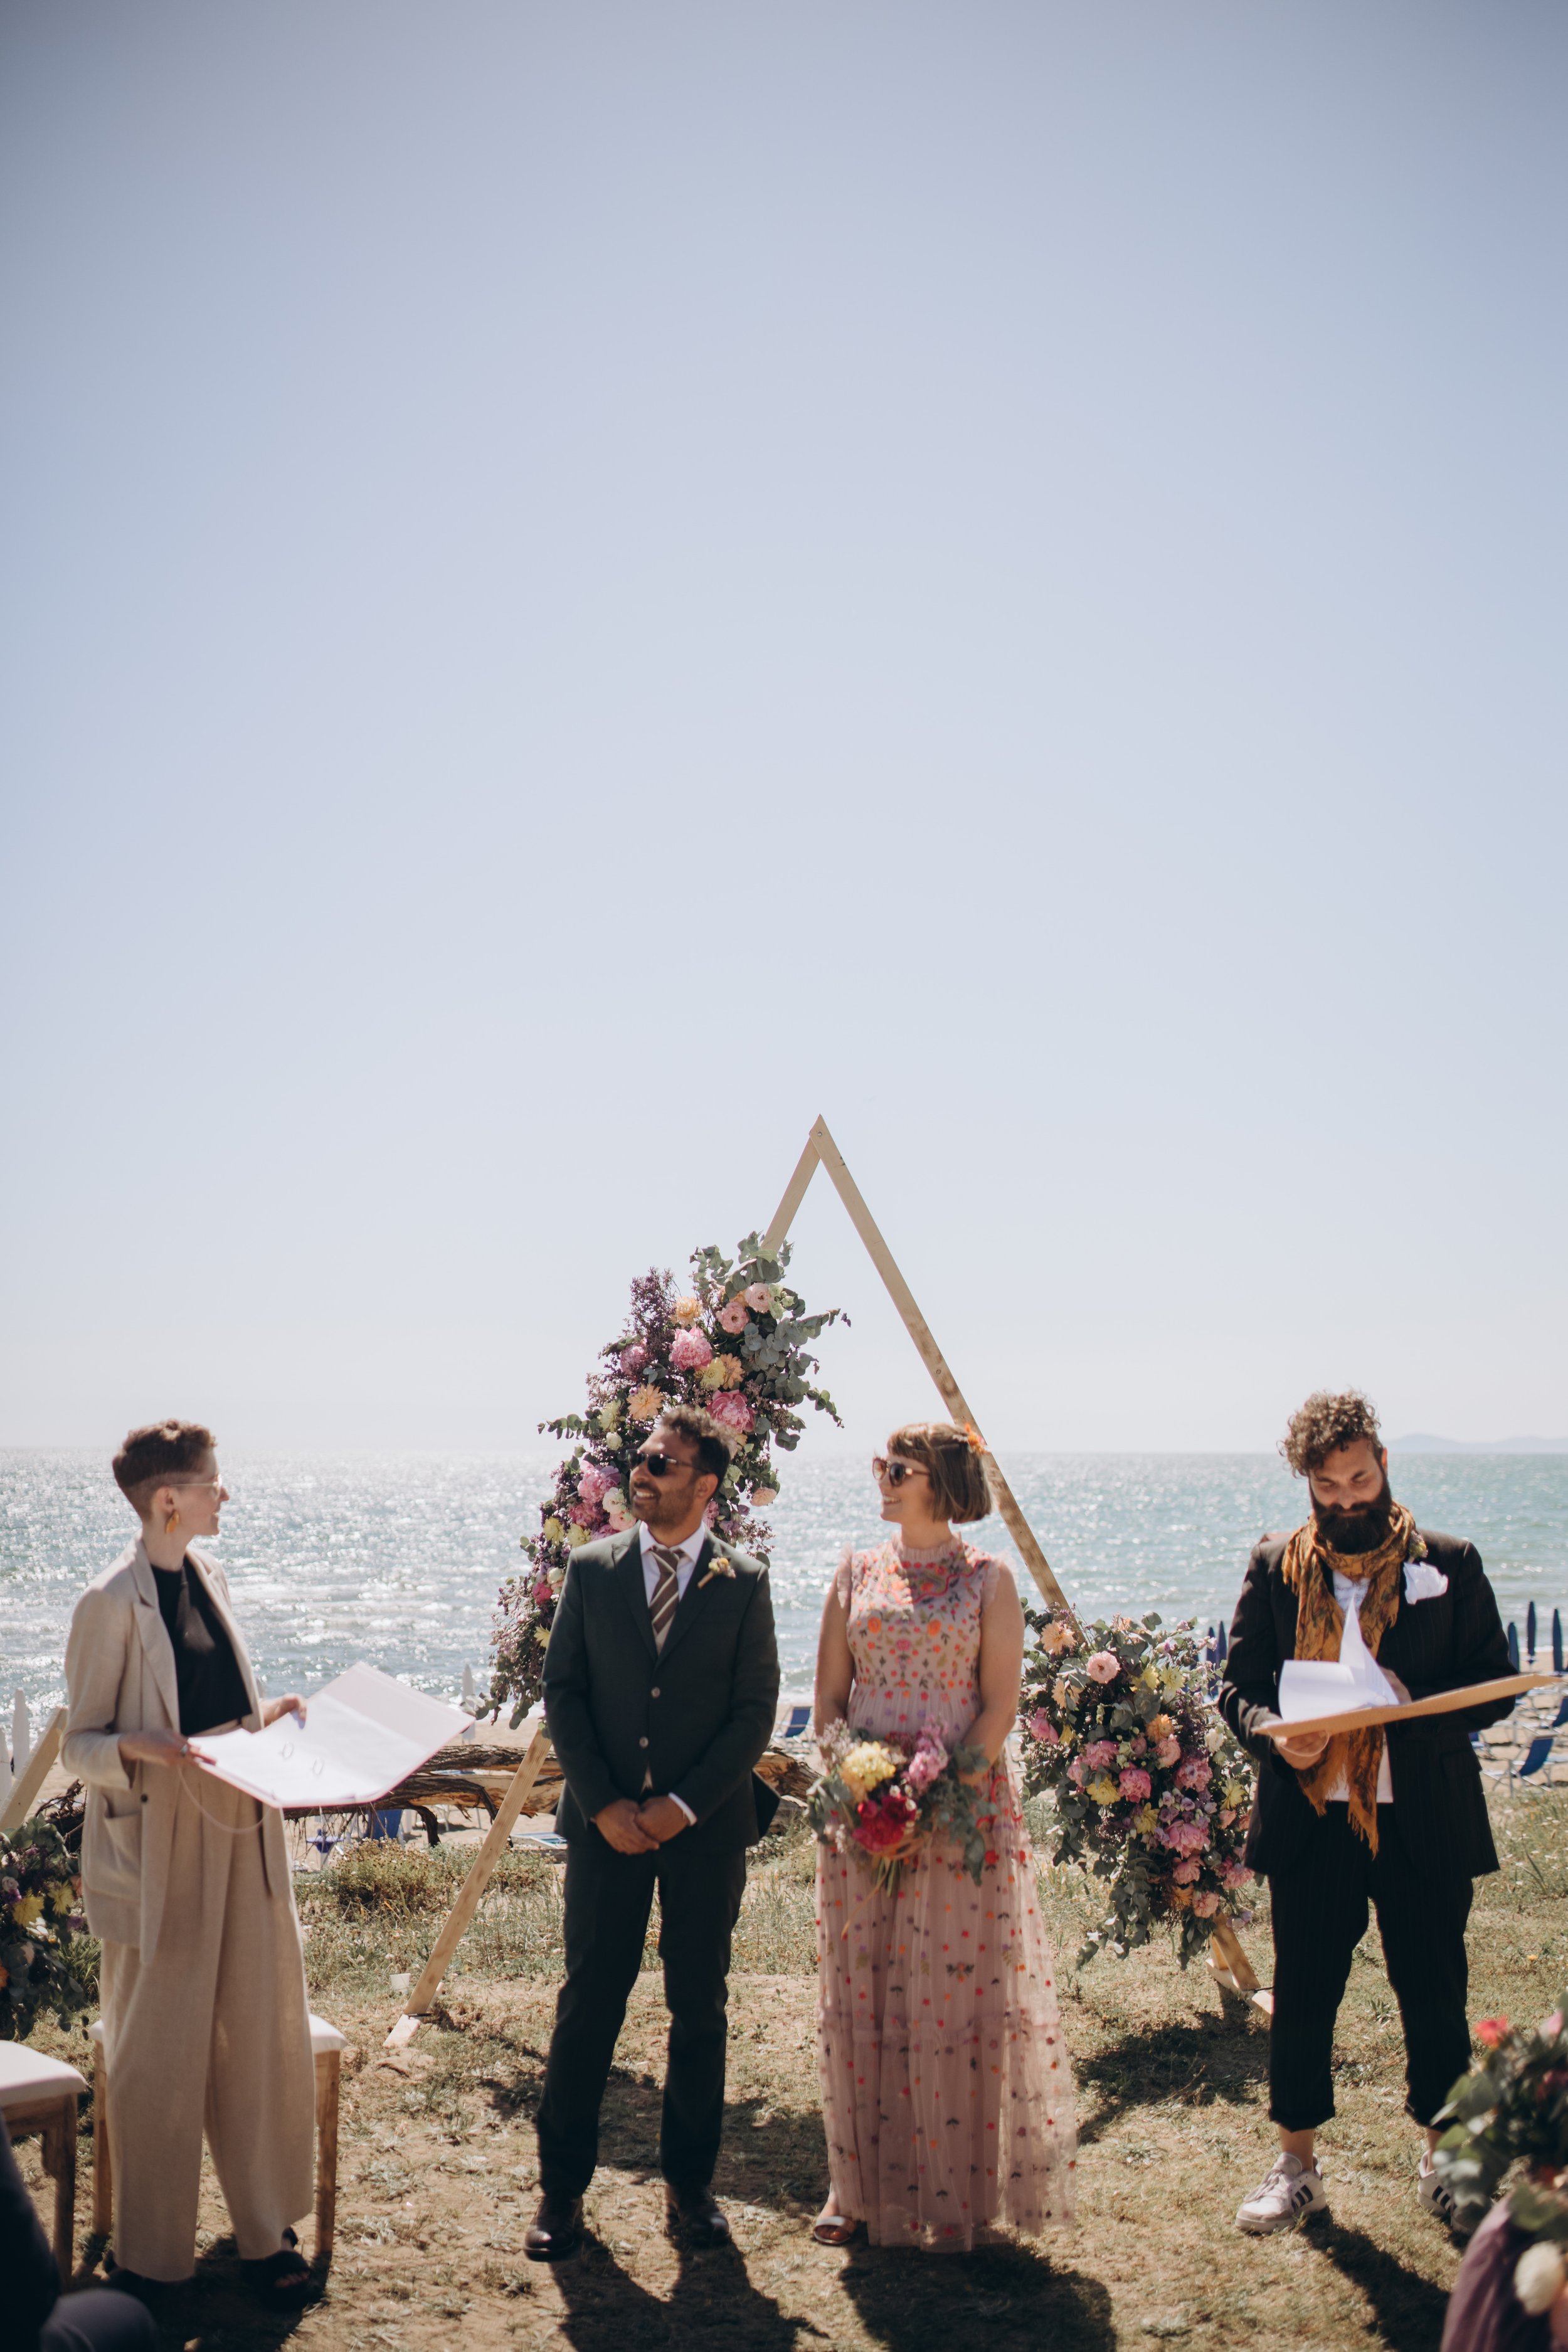  The cool, modern celebrant is stood on a beach next to the bride and groom leading their wedding ceremony as their wedding guests look on.   Photo by: Lisa Elisa Photography   